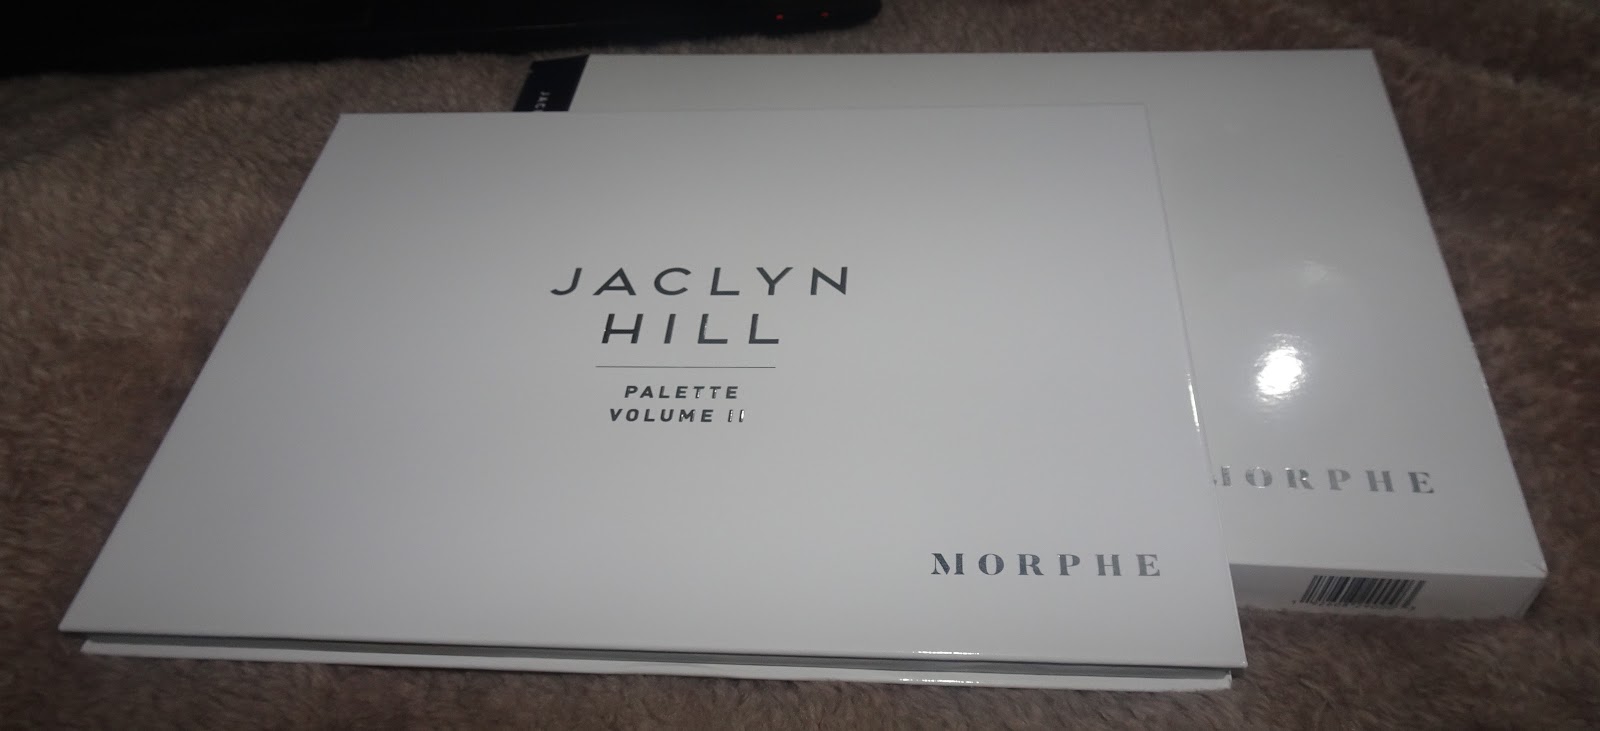 Pretty Senses: Jaclyn Hill strikes back [reviewing the Jaclyn Hill